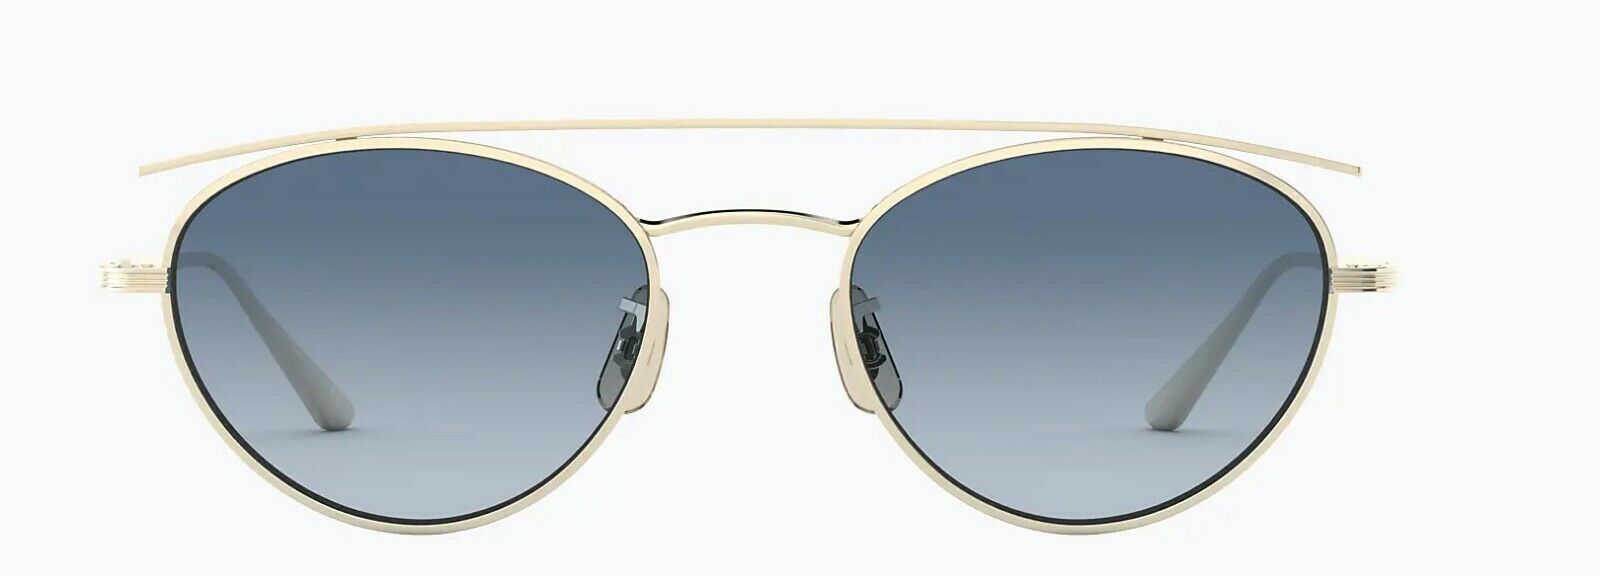 Oliver Peoples Sunglasses 1258ST 5035Q8 The Row Hightree Gold / Marine Gradient-0827934432628-classypw.com-2